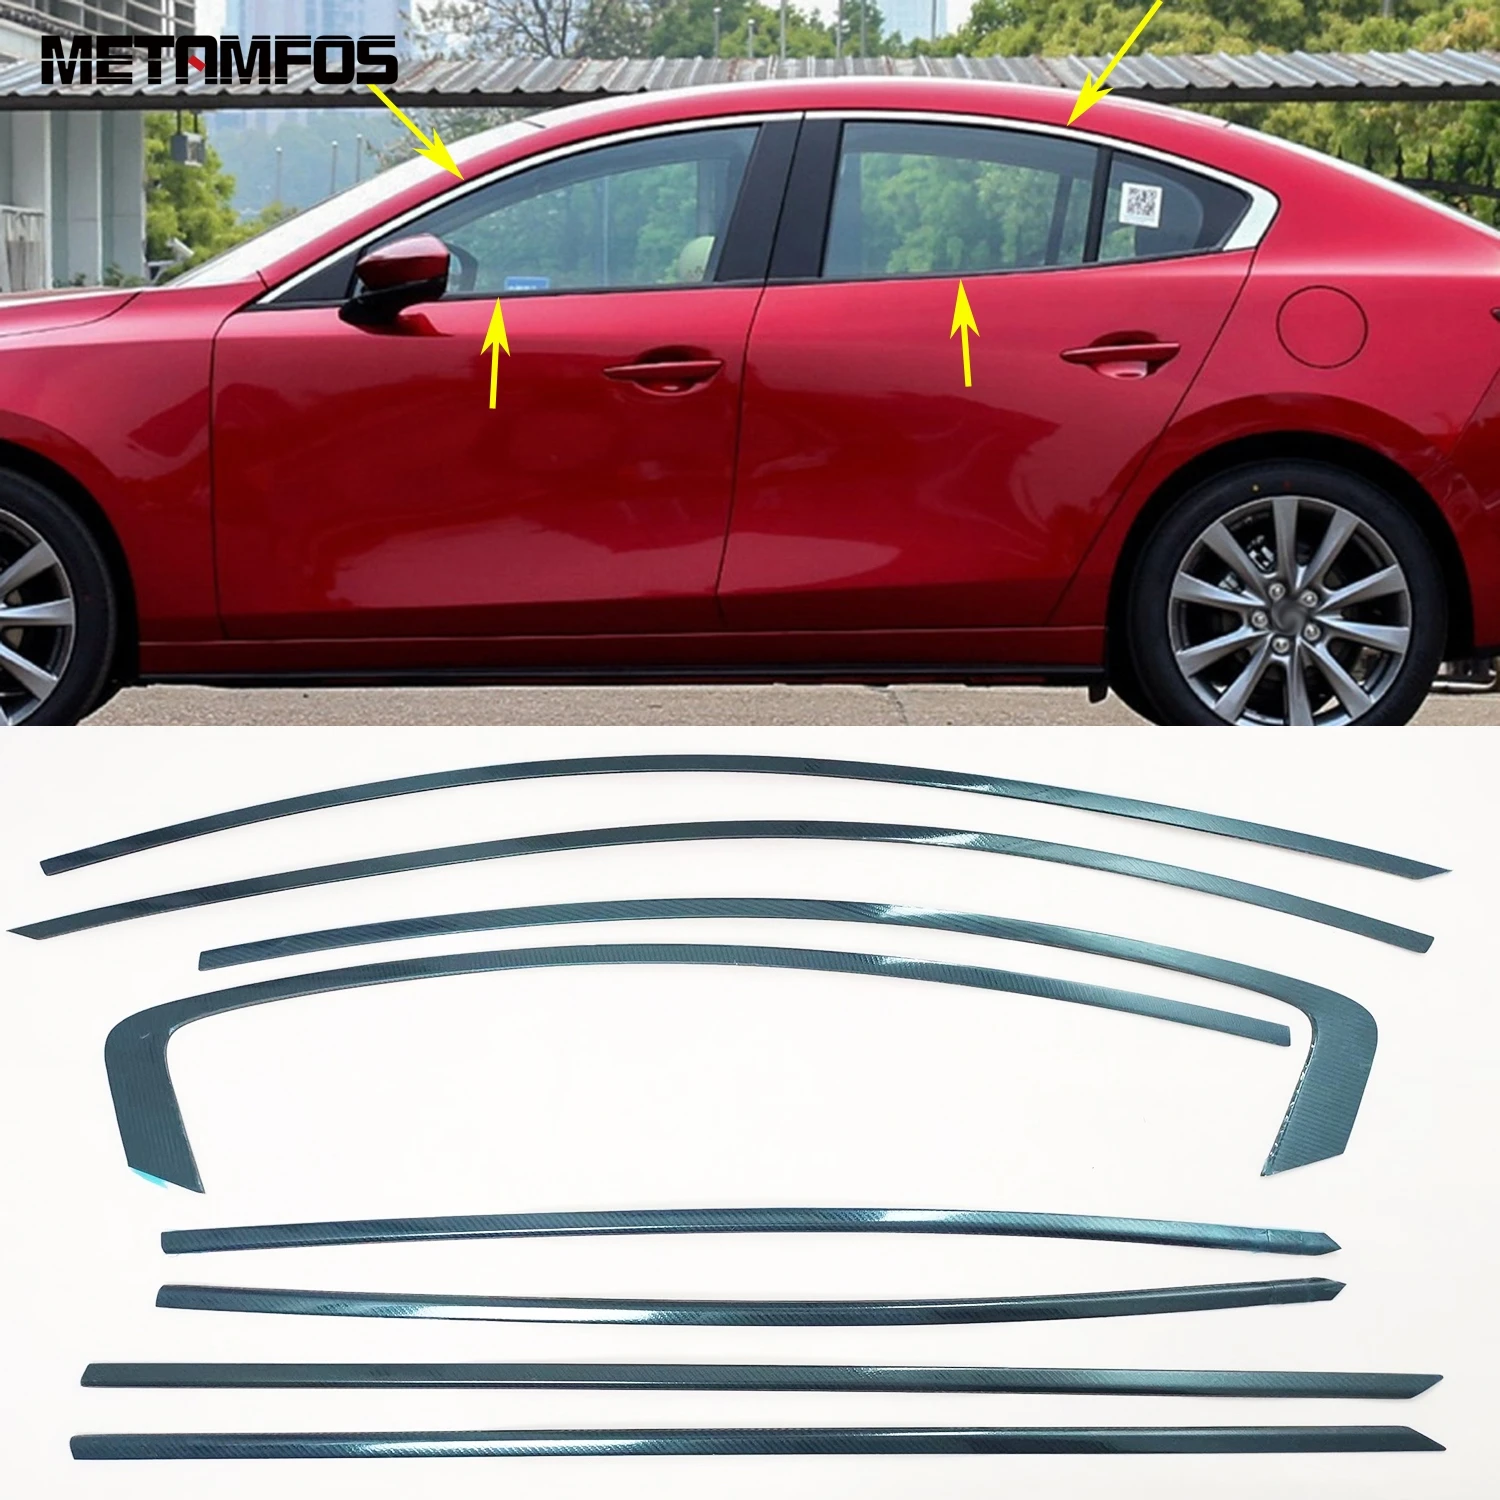 

For Mazda 3 M3 Axela Sedan 2019 2020 2021 Stainless Upper+Lower Window Sill Frame Cover Trim Sticker Accessories Car Styling